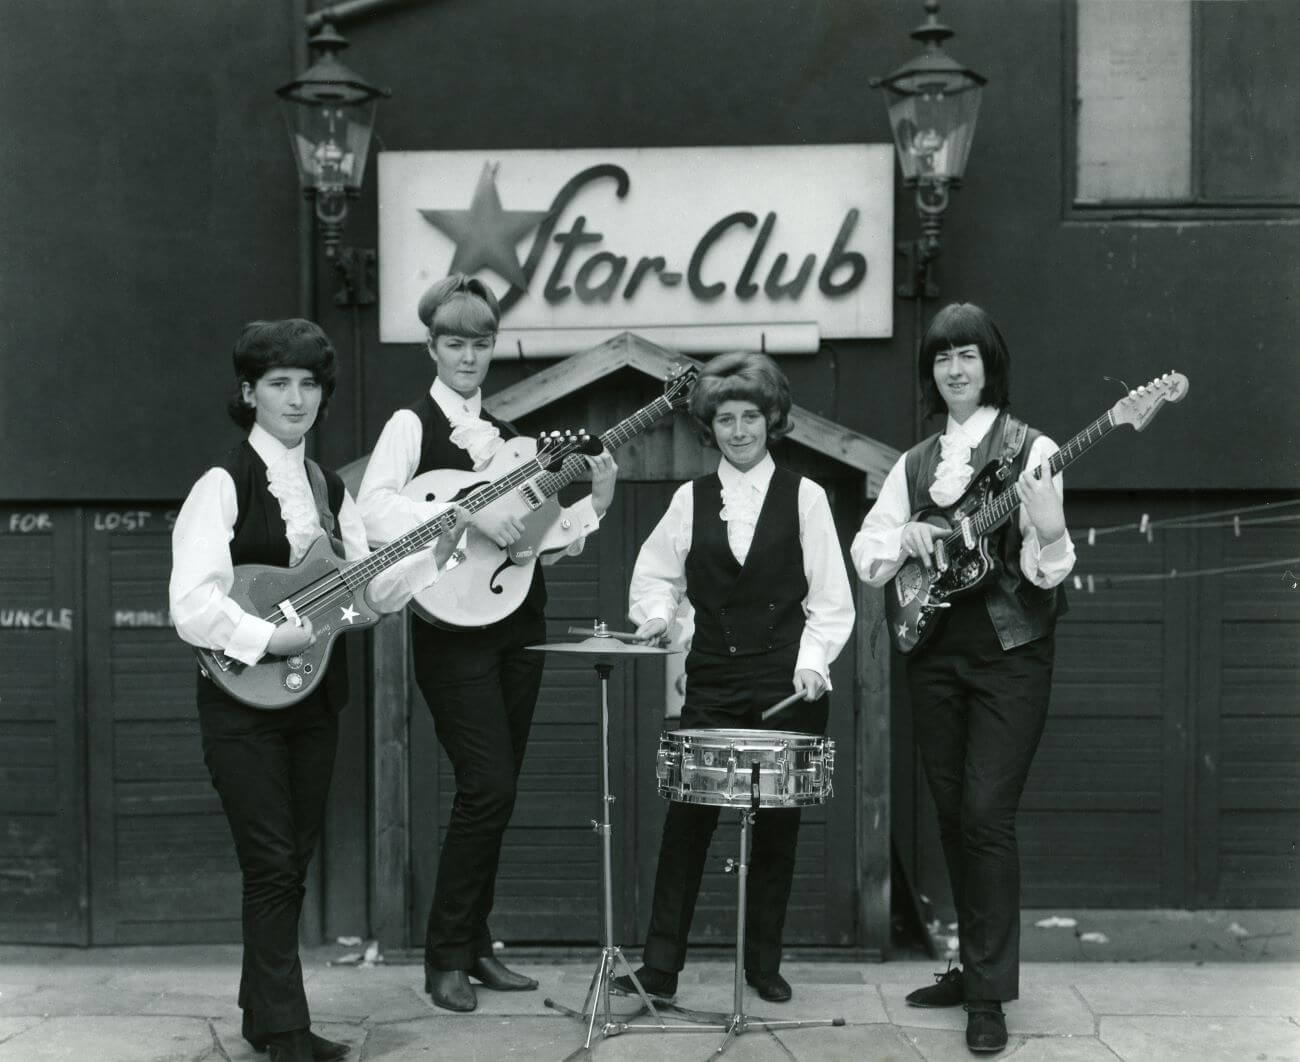 A black and white picture of Mary McGlory, Pamela Birch, Sylvia Saunders, and Valerie Gell of The Liverbirds posing with instruments outside the Star Club.